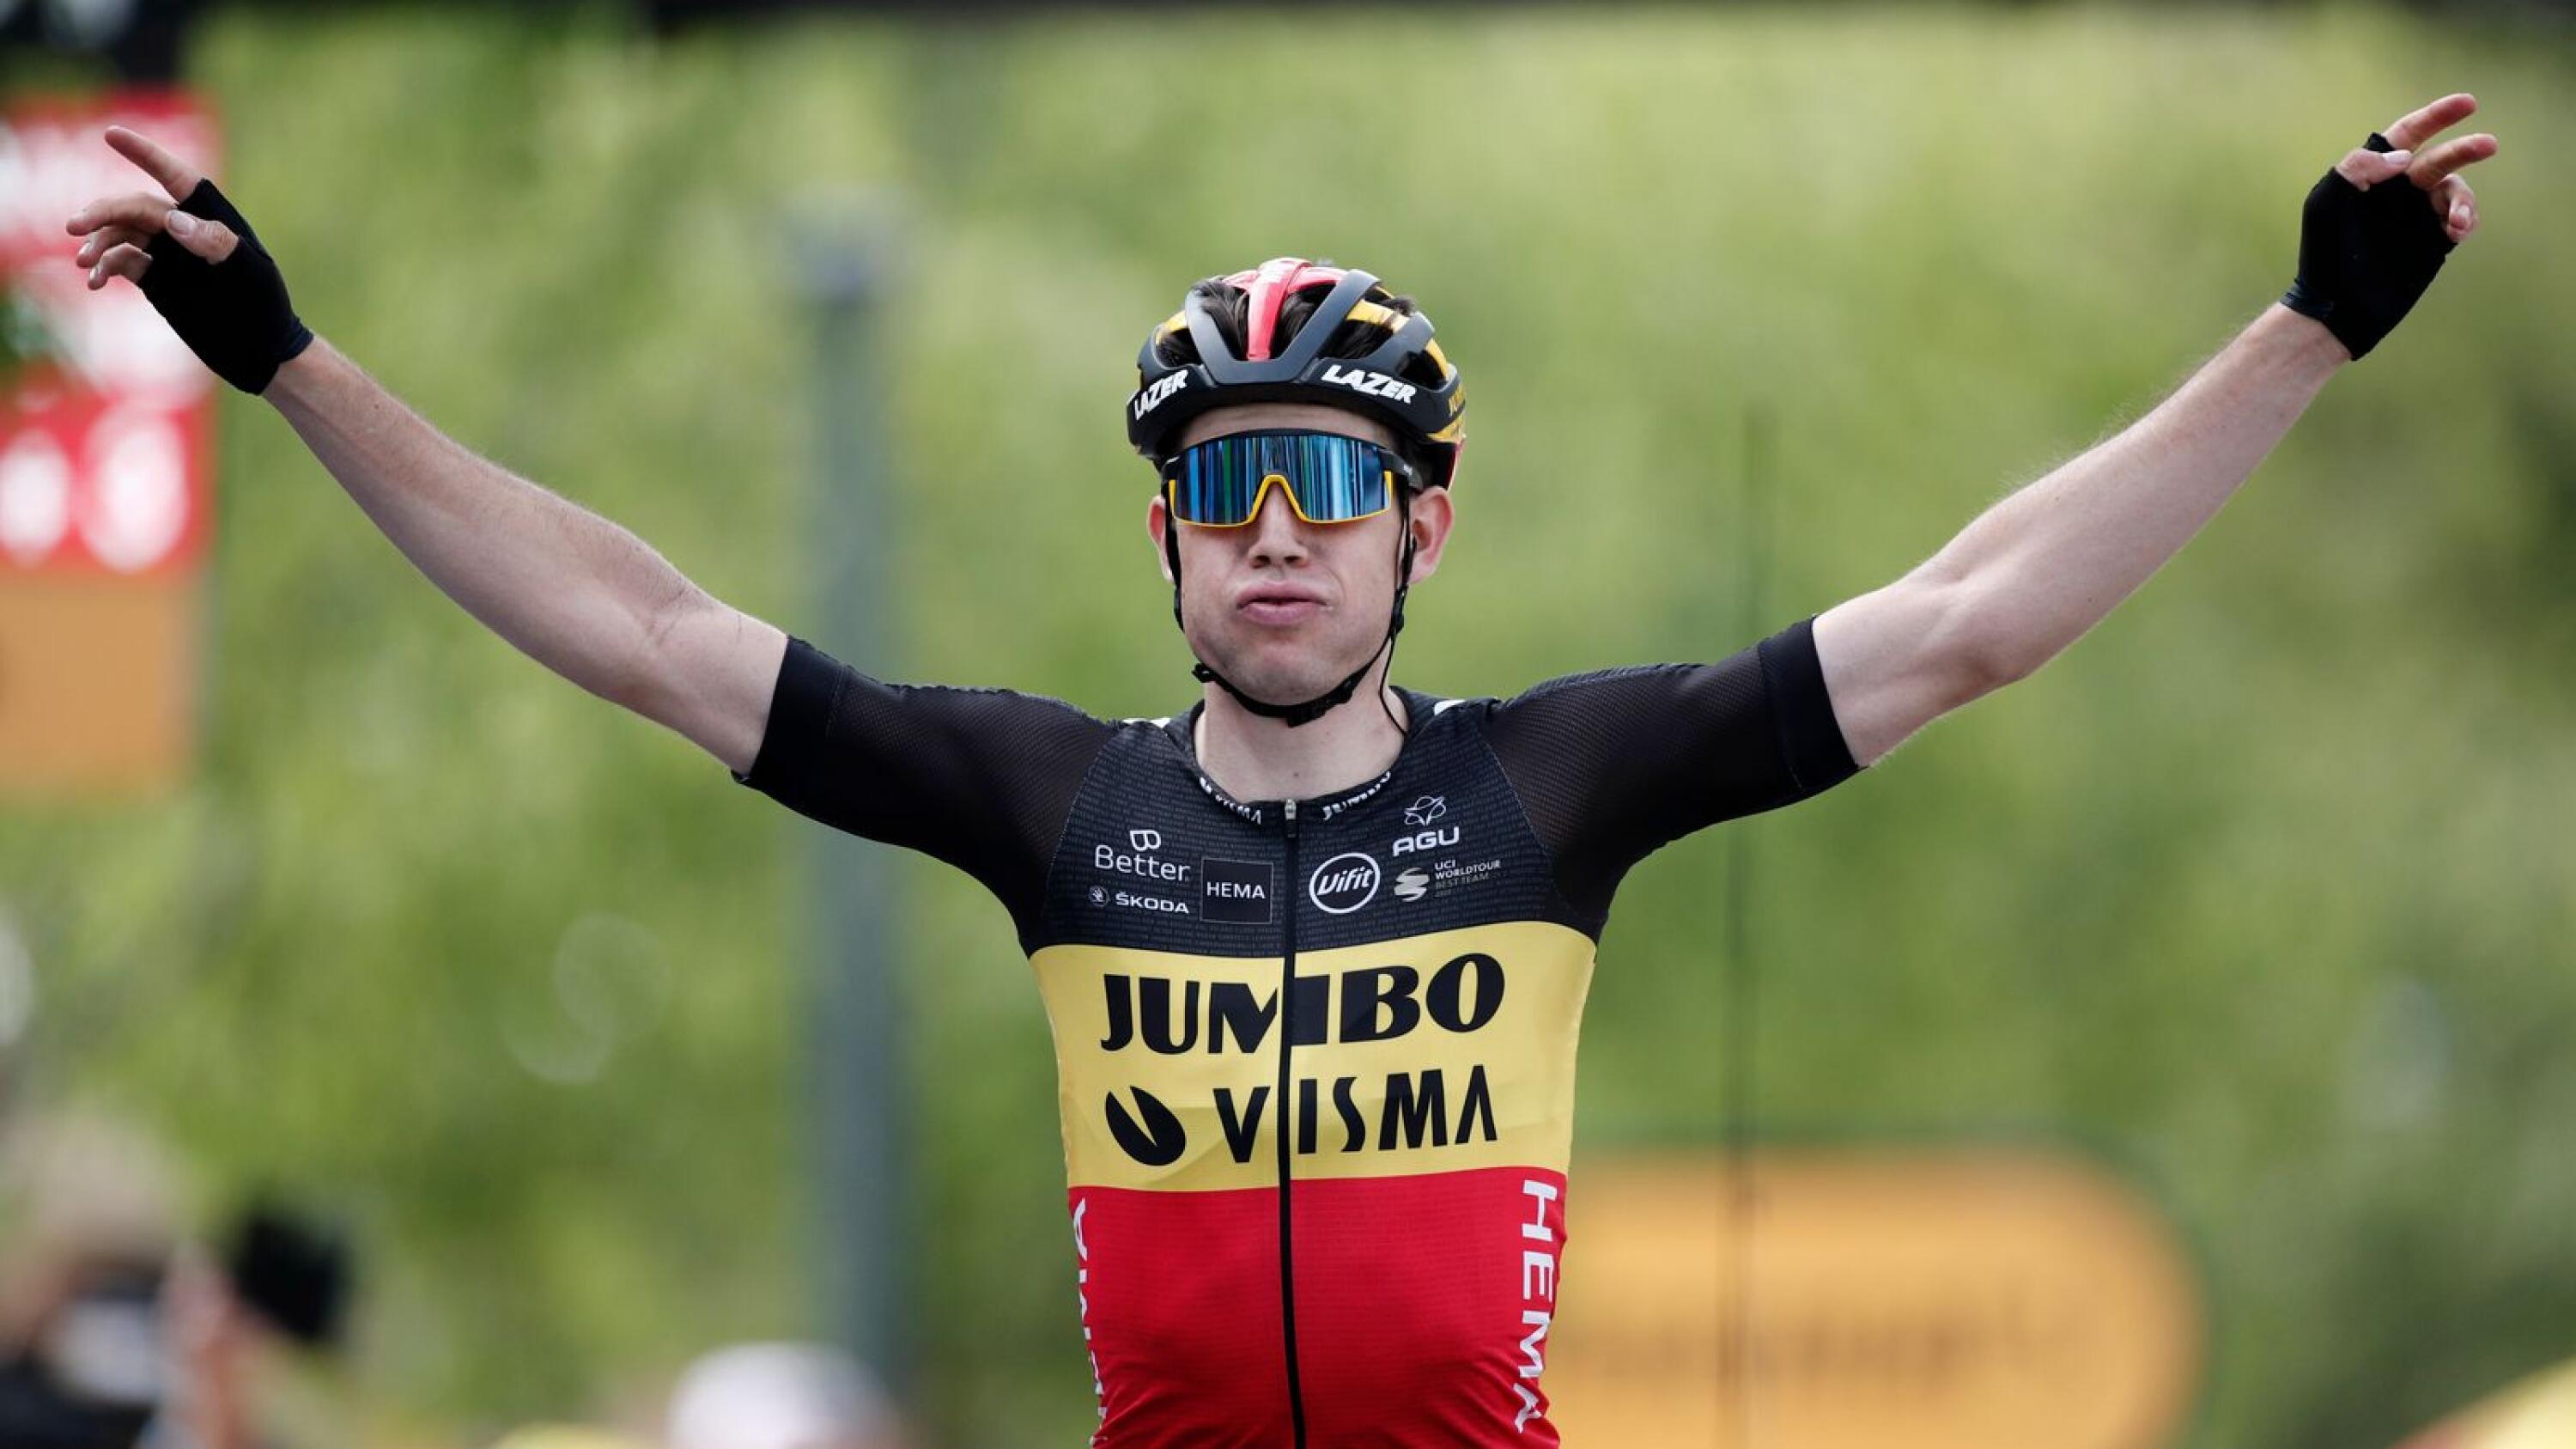 Team Jumbo–Visma rider Wout van Aert of Belgium celebrates as he crosses the finish line to win stage 11 of the Tour de France